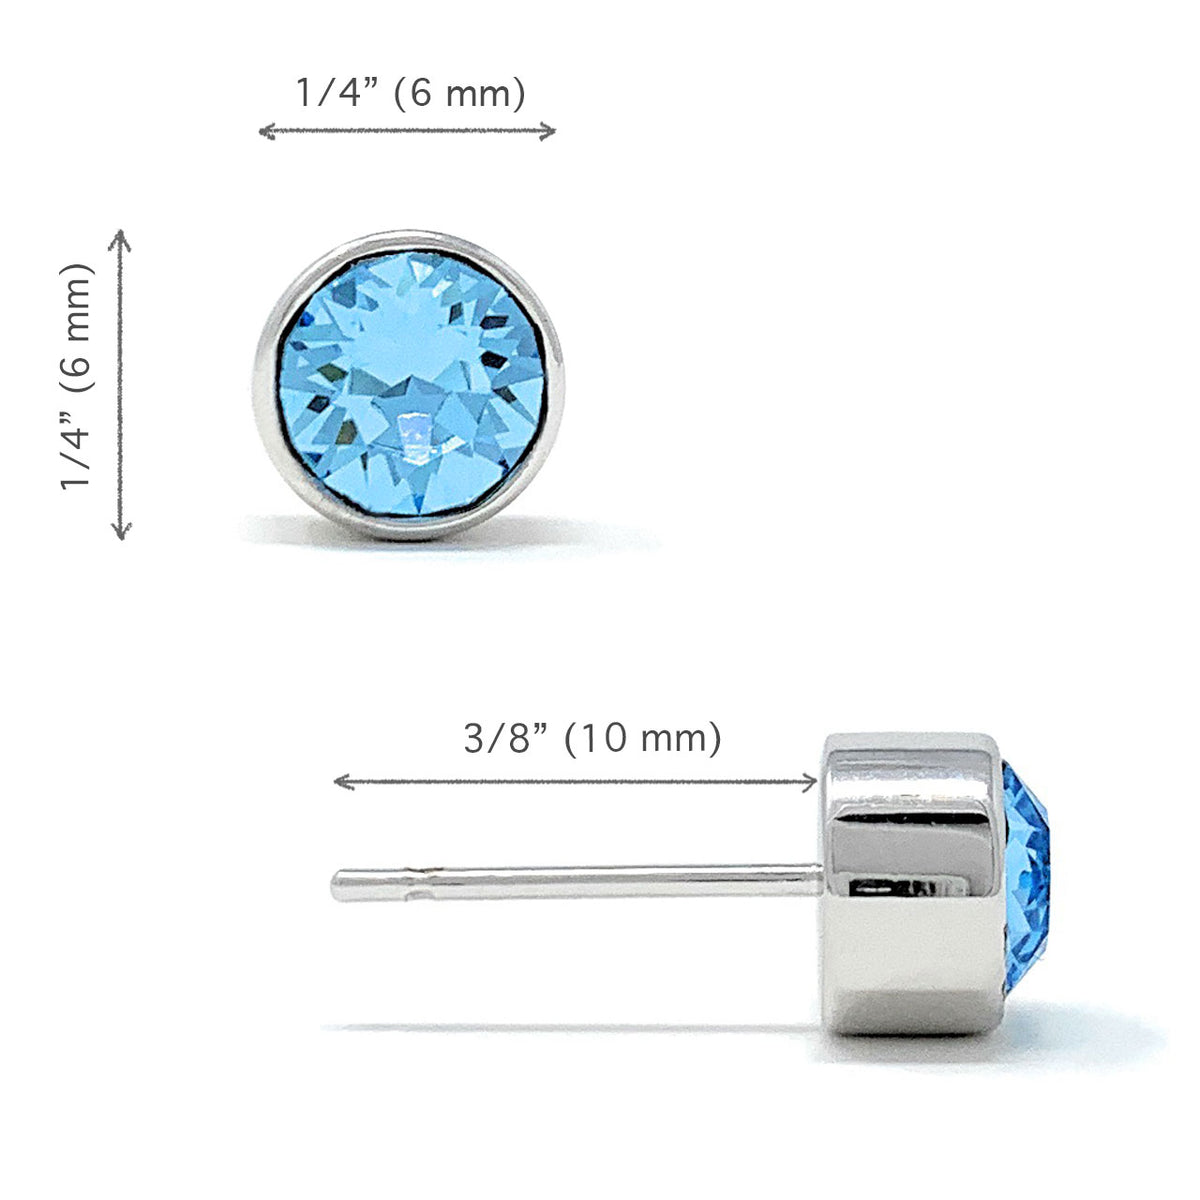 Harley Small Stud Earrings with Blue Aquamarine Round Crystals from Swarovski Silver Toned Rhodium Plated - Ed Heart